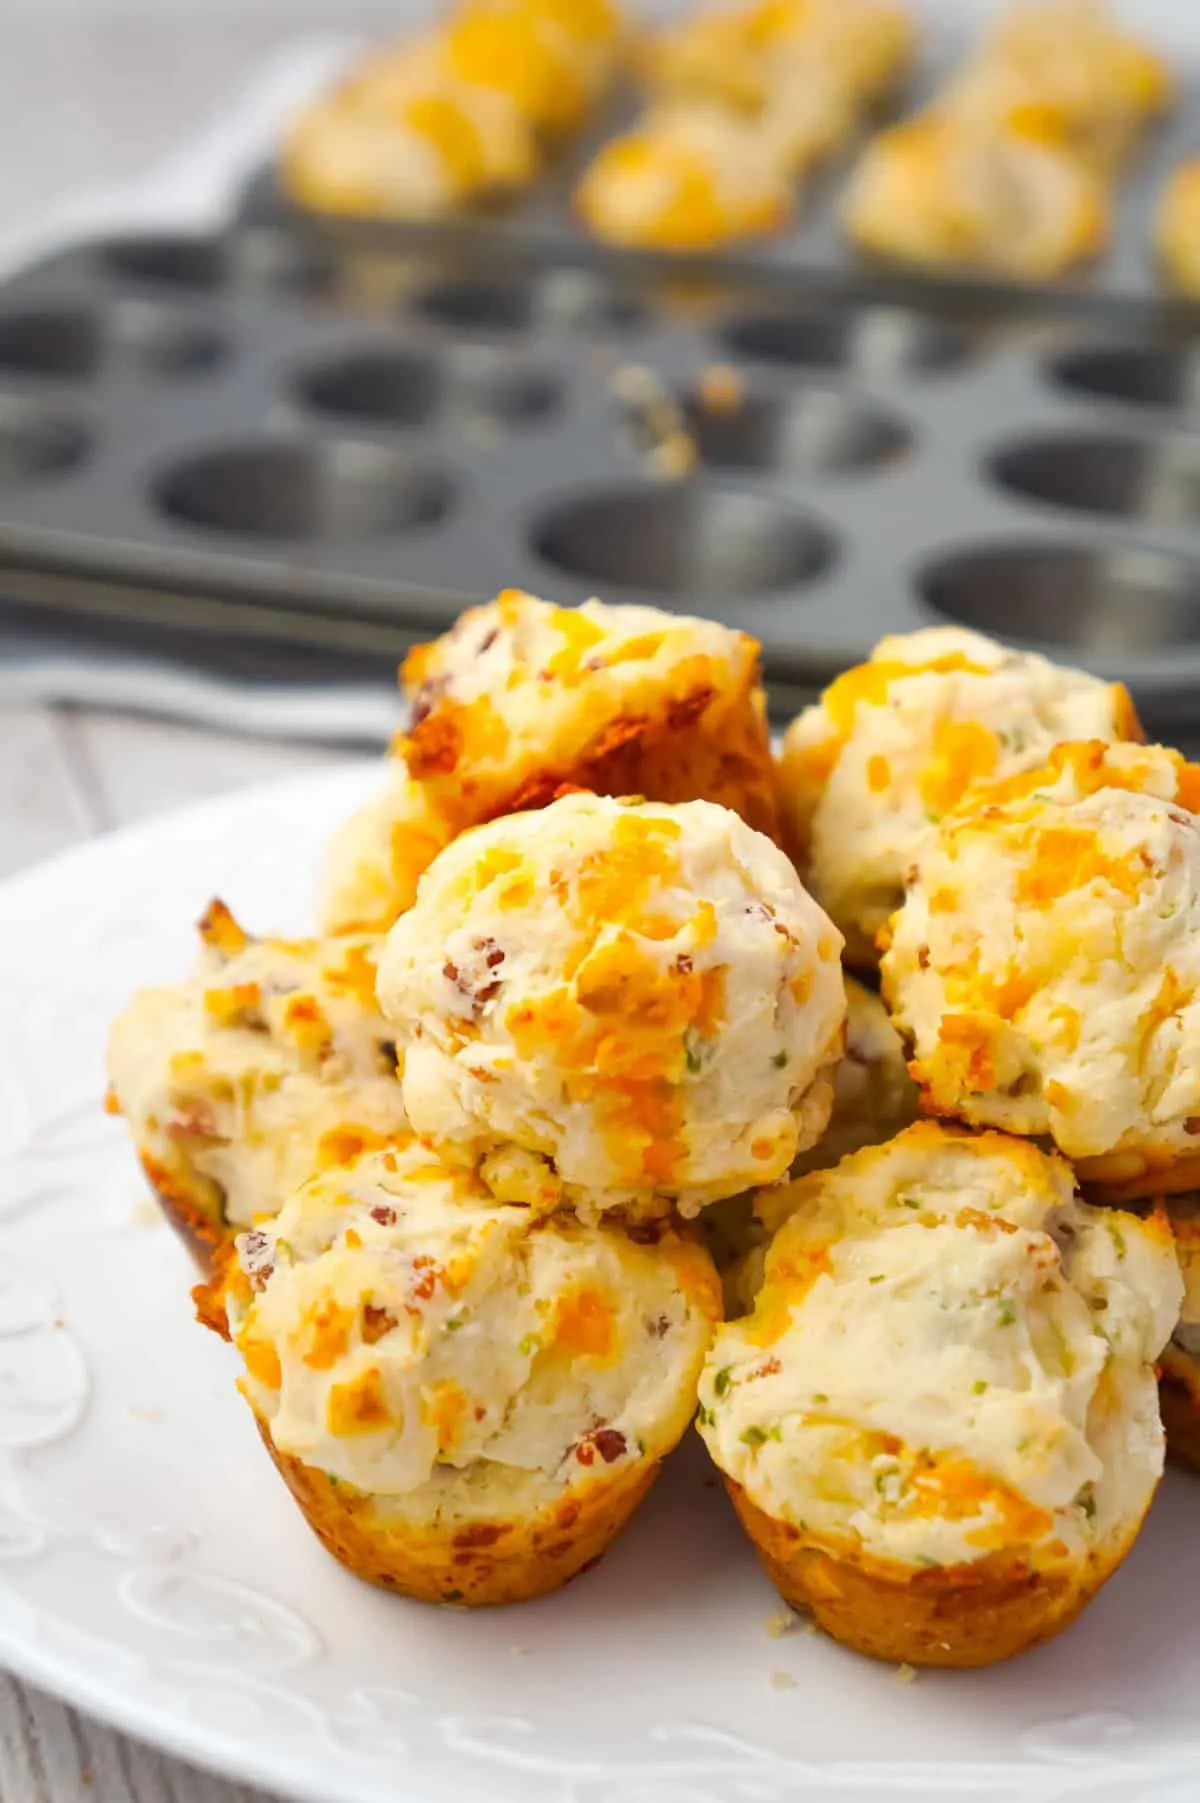 Cheddar Bacon Biscuit Bites are tasty little biscuits made with Bisquick, cheddar cheese and crumbled bacon and baked in mini muffin tins.